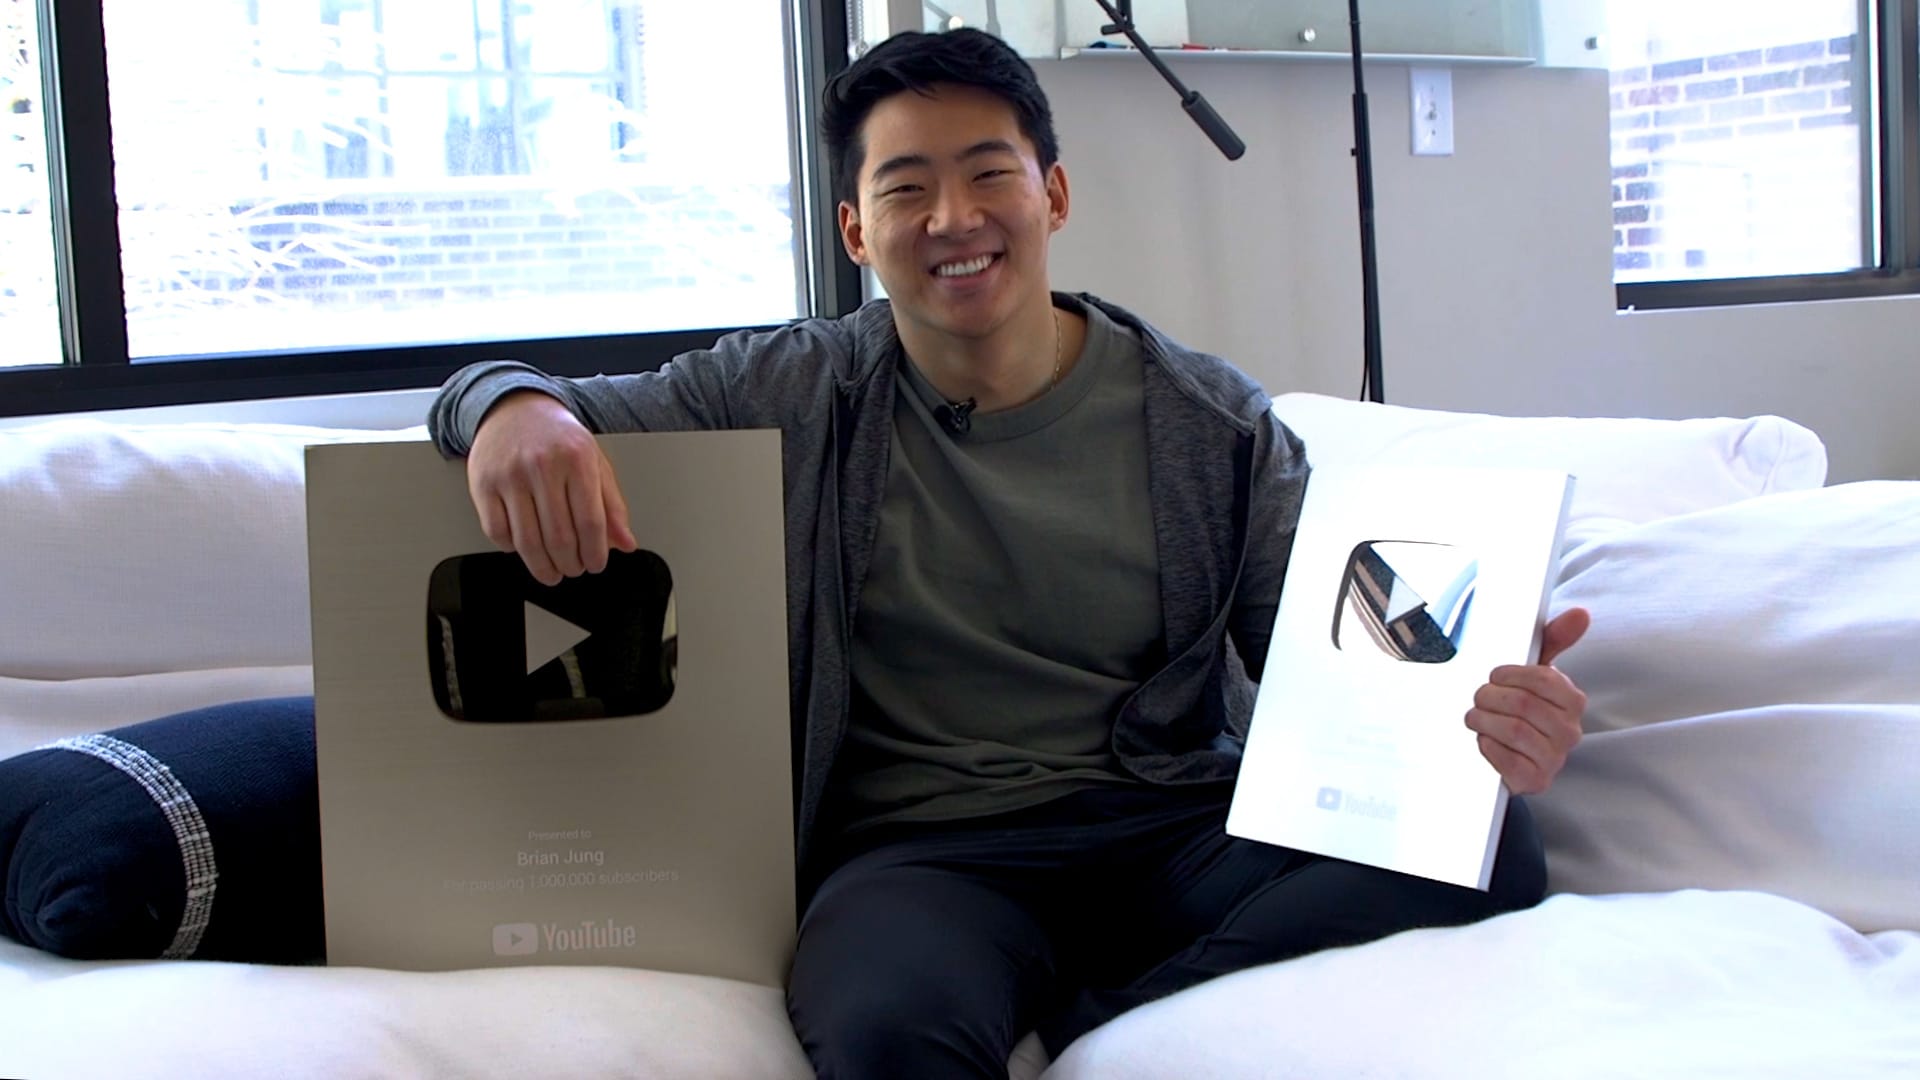 Brian Jung poses with his YouTube Creator Awards.